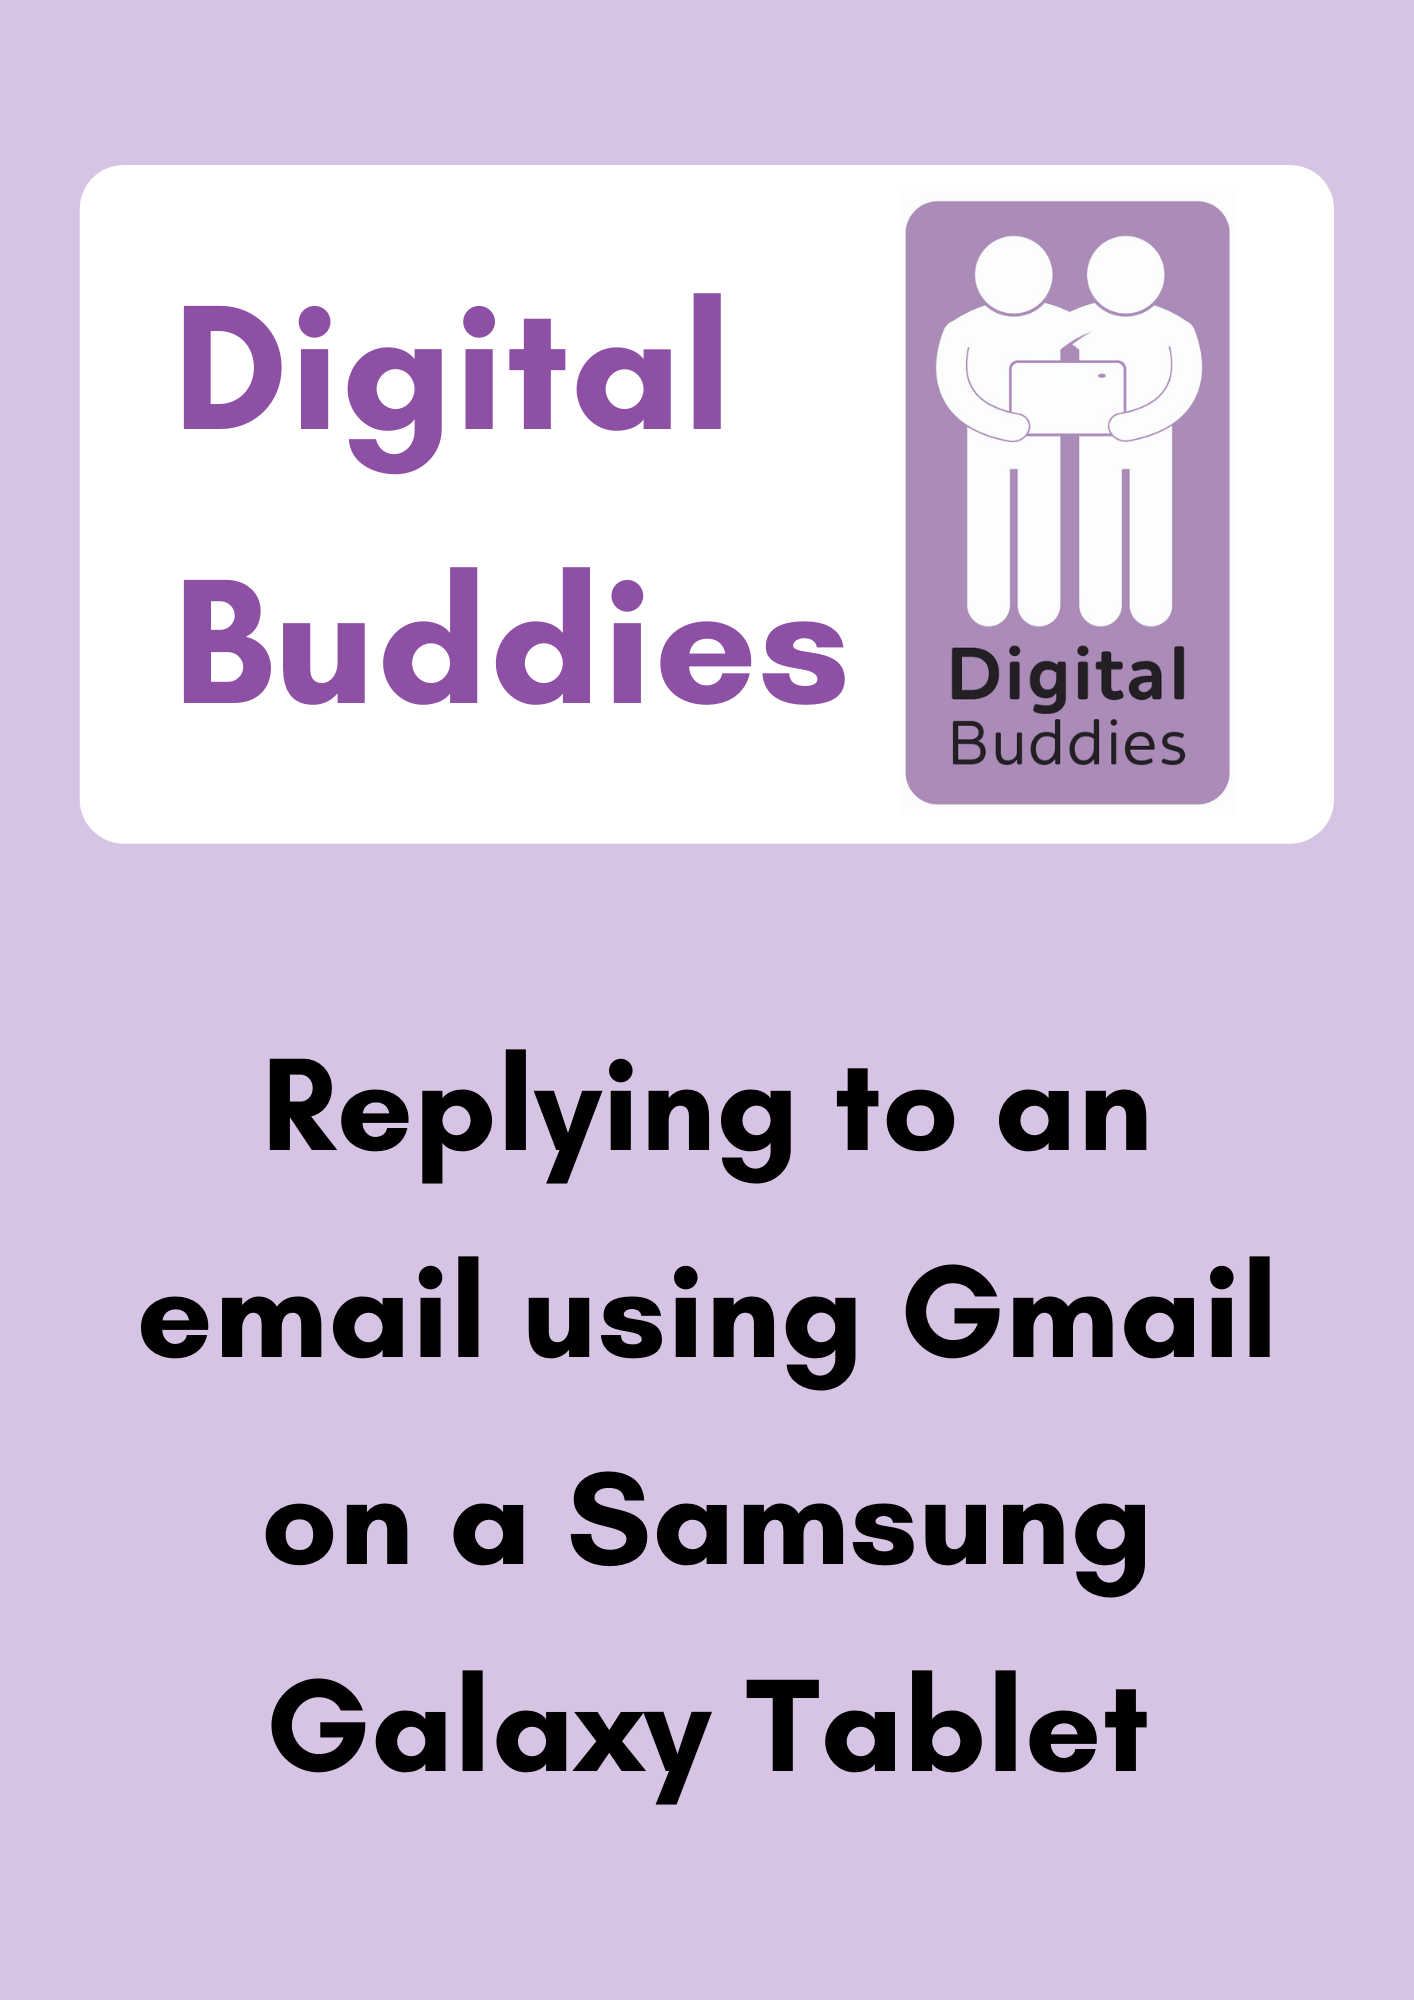 Digital buddies. Replying to an email using Gmail on a Samsung Galaxy Tablet